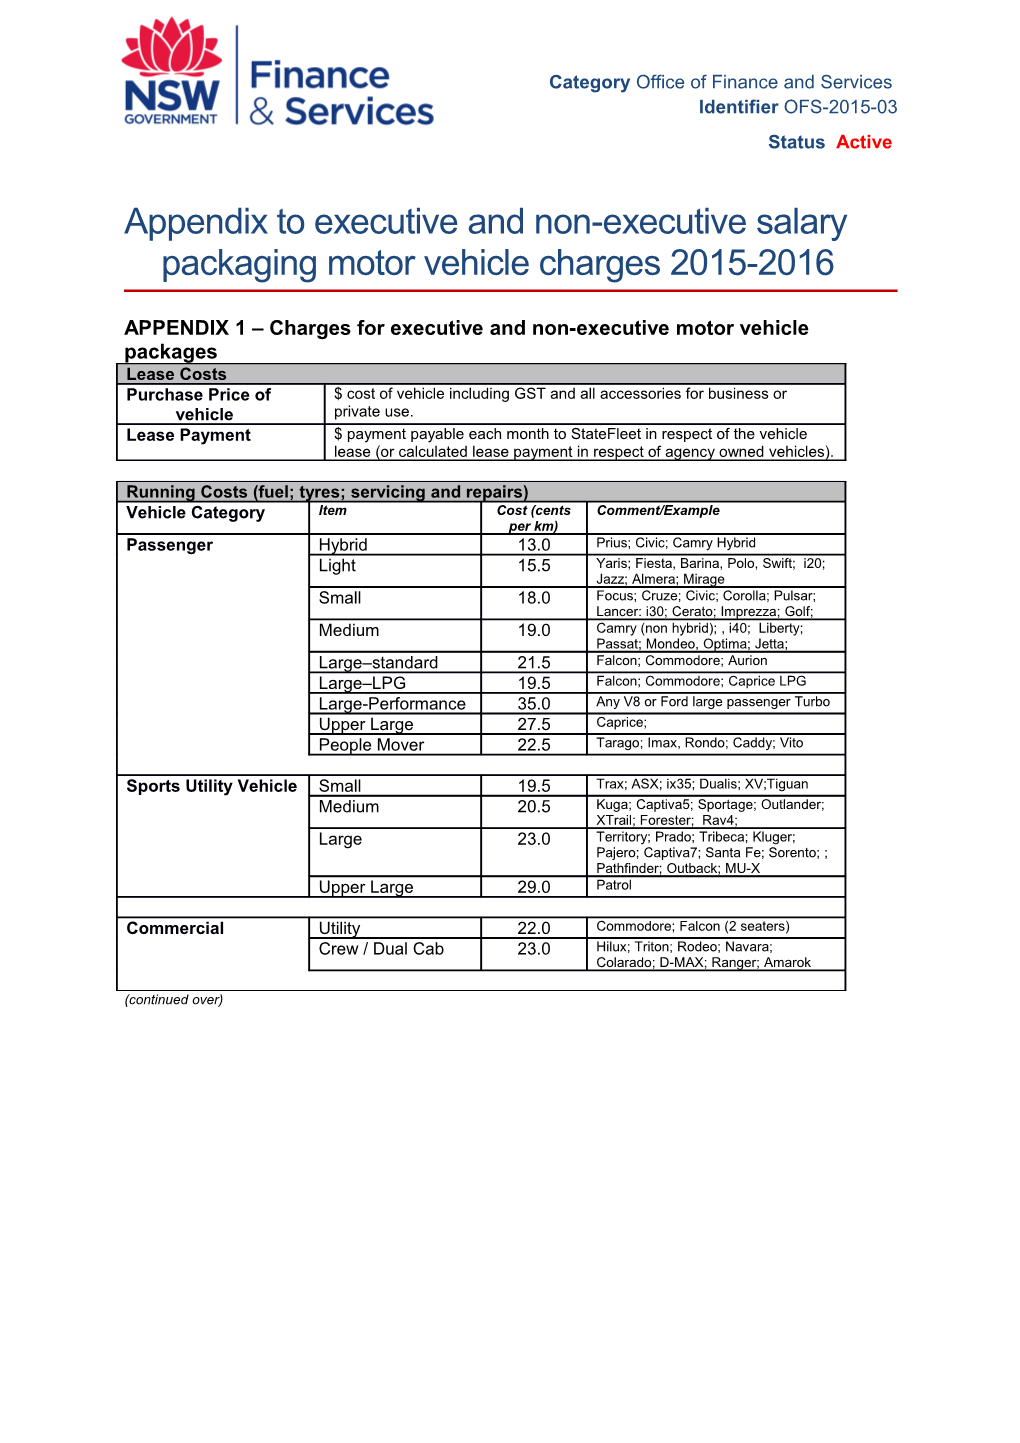 Appendix to Executive and Non-Executive Salary Packaging Motor Vehicle Charges 2015-2016